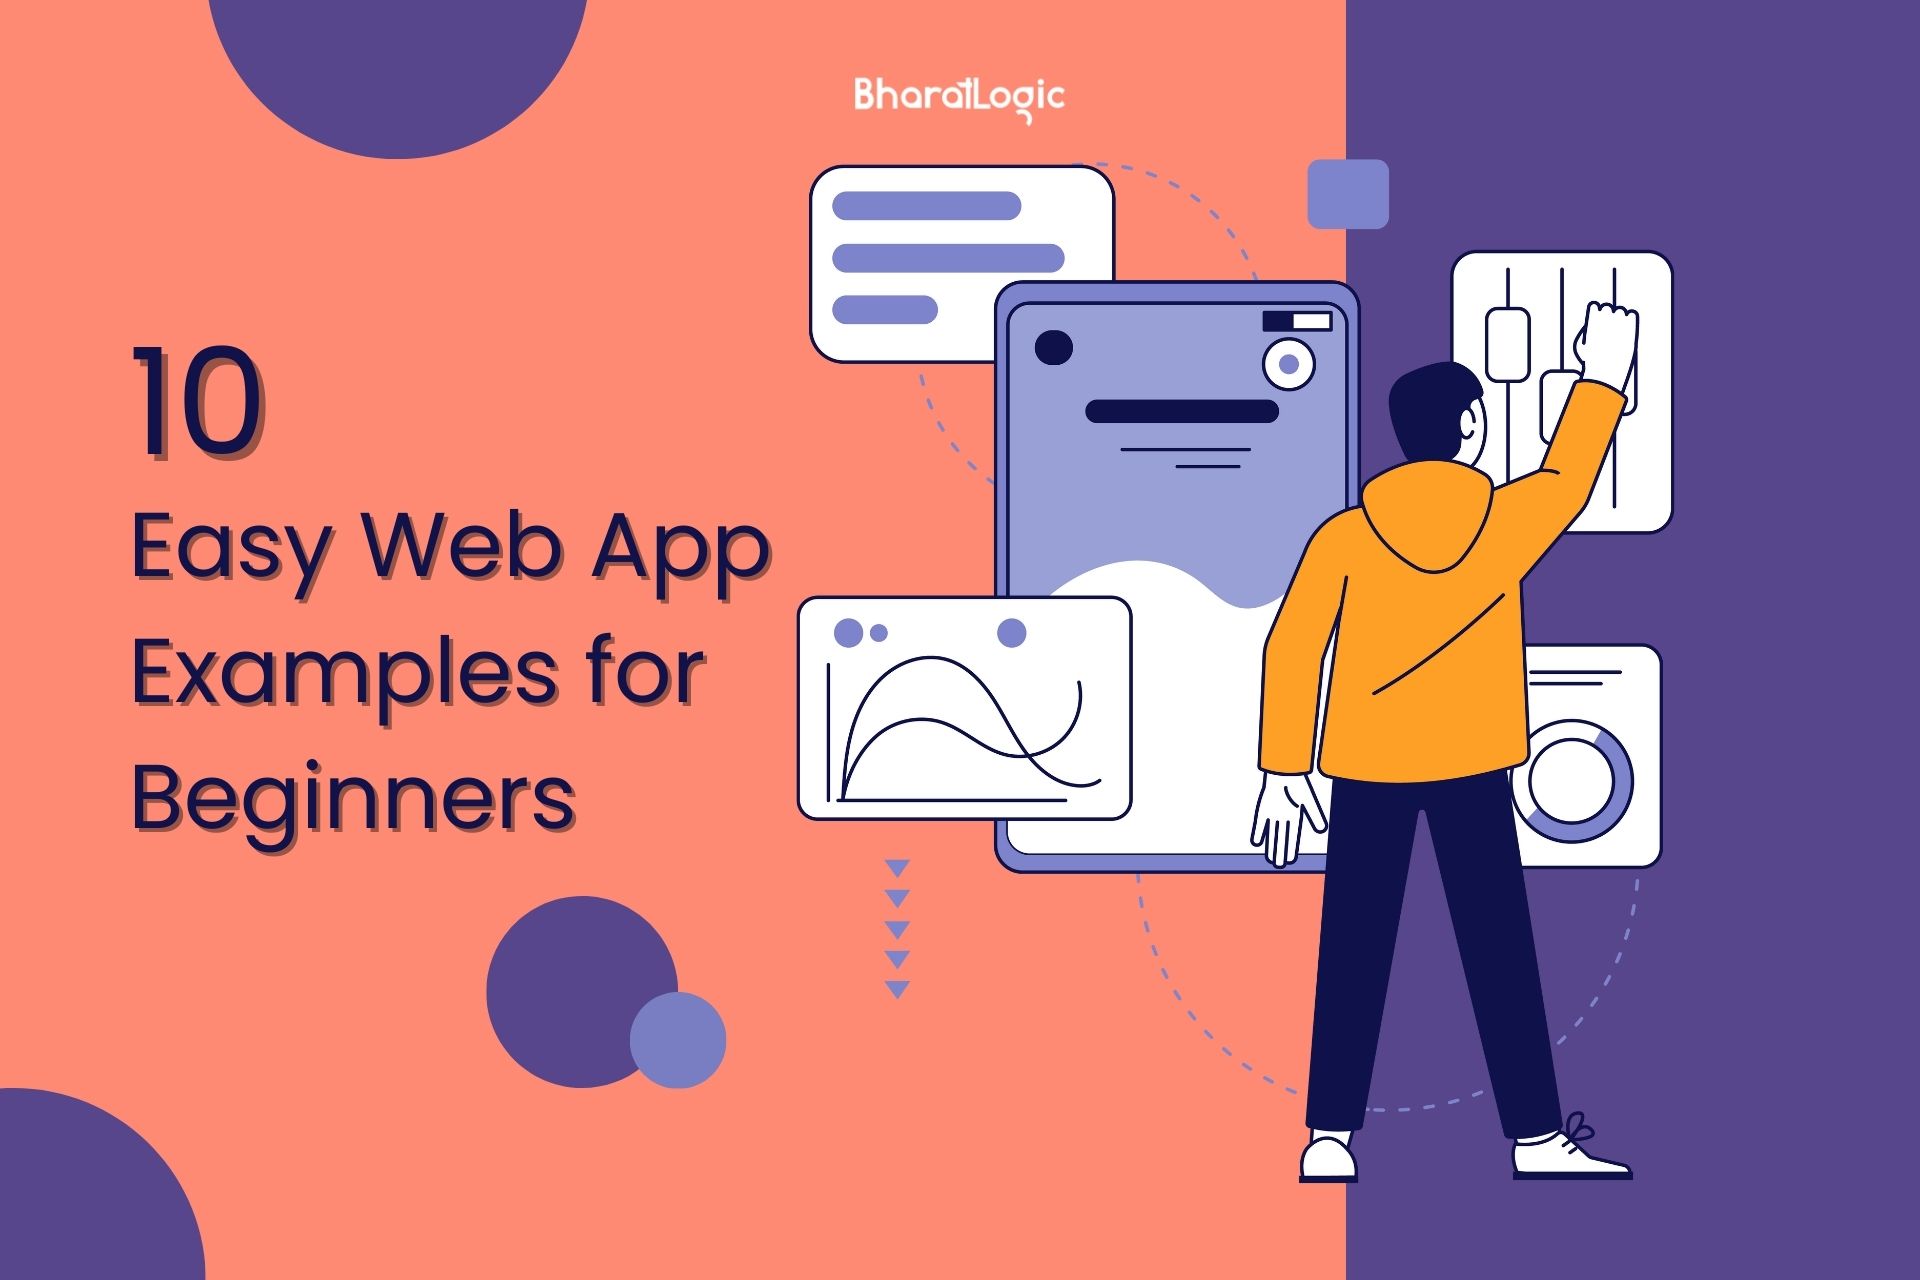 0 Easy Web App Examples for Beginners